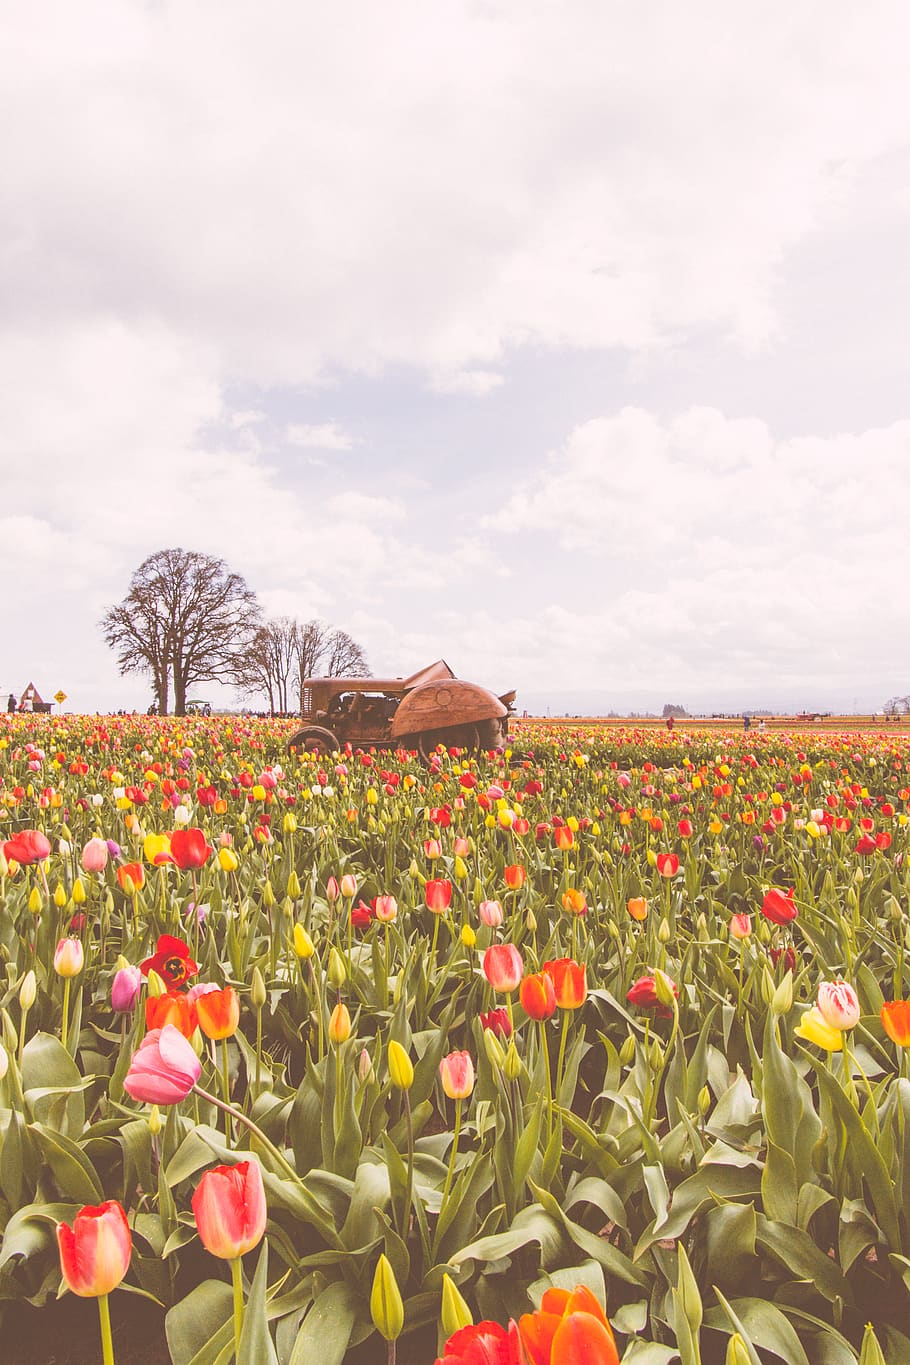 A field of tulips in the foreground with a farm house in the background. - Tulip